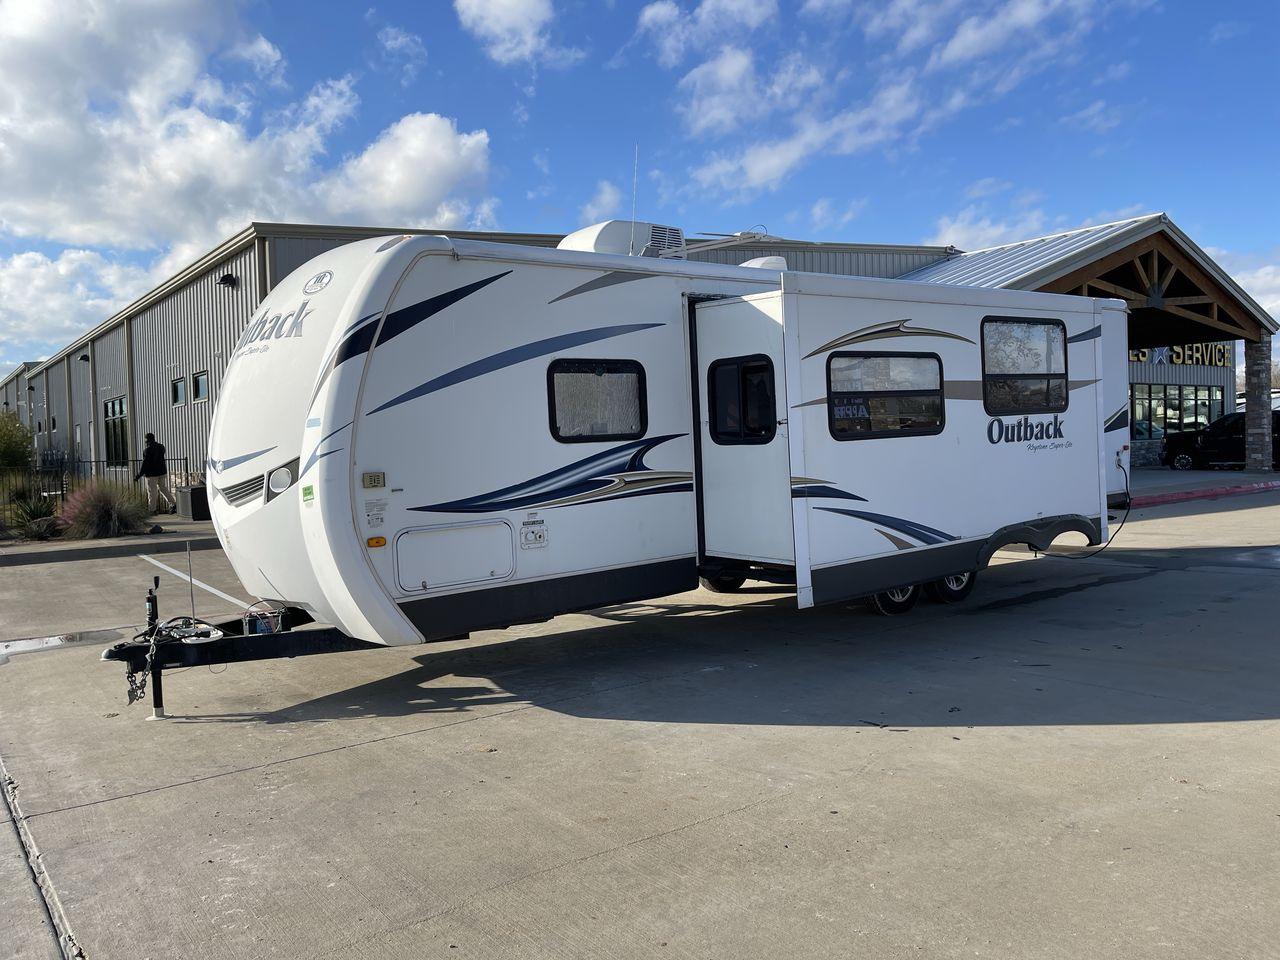 2012 WHITE KEYSTONE OUTBACK 292BH (4YDT29225CB) , Length: 32.75 | Dry Weight: 6,559 lbs. | Gross Weight: 8,200 lbs. | Slides: 1 transmission, located at 4319 N Main St, Cleburne, TX, 76033, (817) 678-5133, 32.385960, -97.391212 - The 2012 Keystone Outback 292BH is a versatile and well-equipped travel trailer perfect for enjoyable family adventures. This model offers a great balance between spaciousness and towability, with a length of 32.75 feet and a dry weight of 6,559 pounds. With a single slide, the Outback 292BH provide - Photo #23